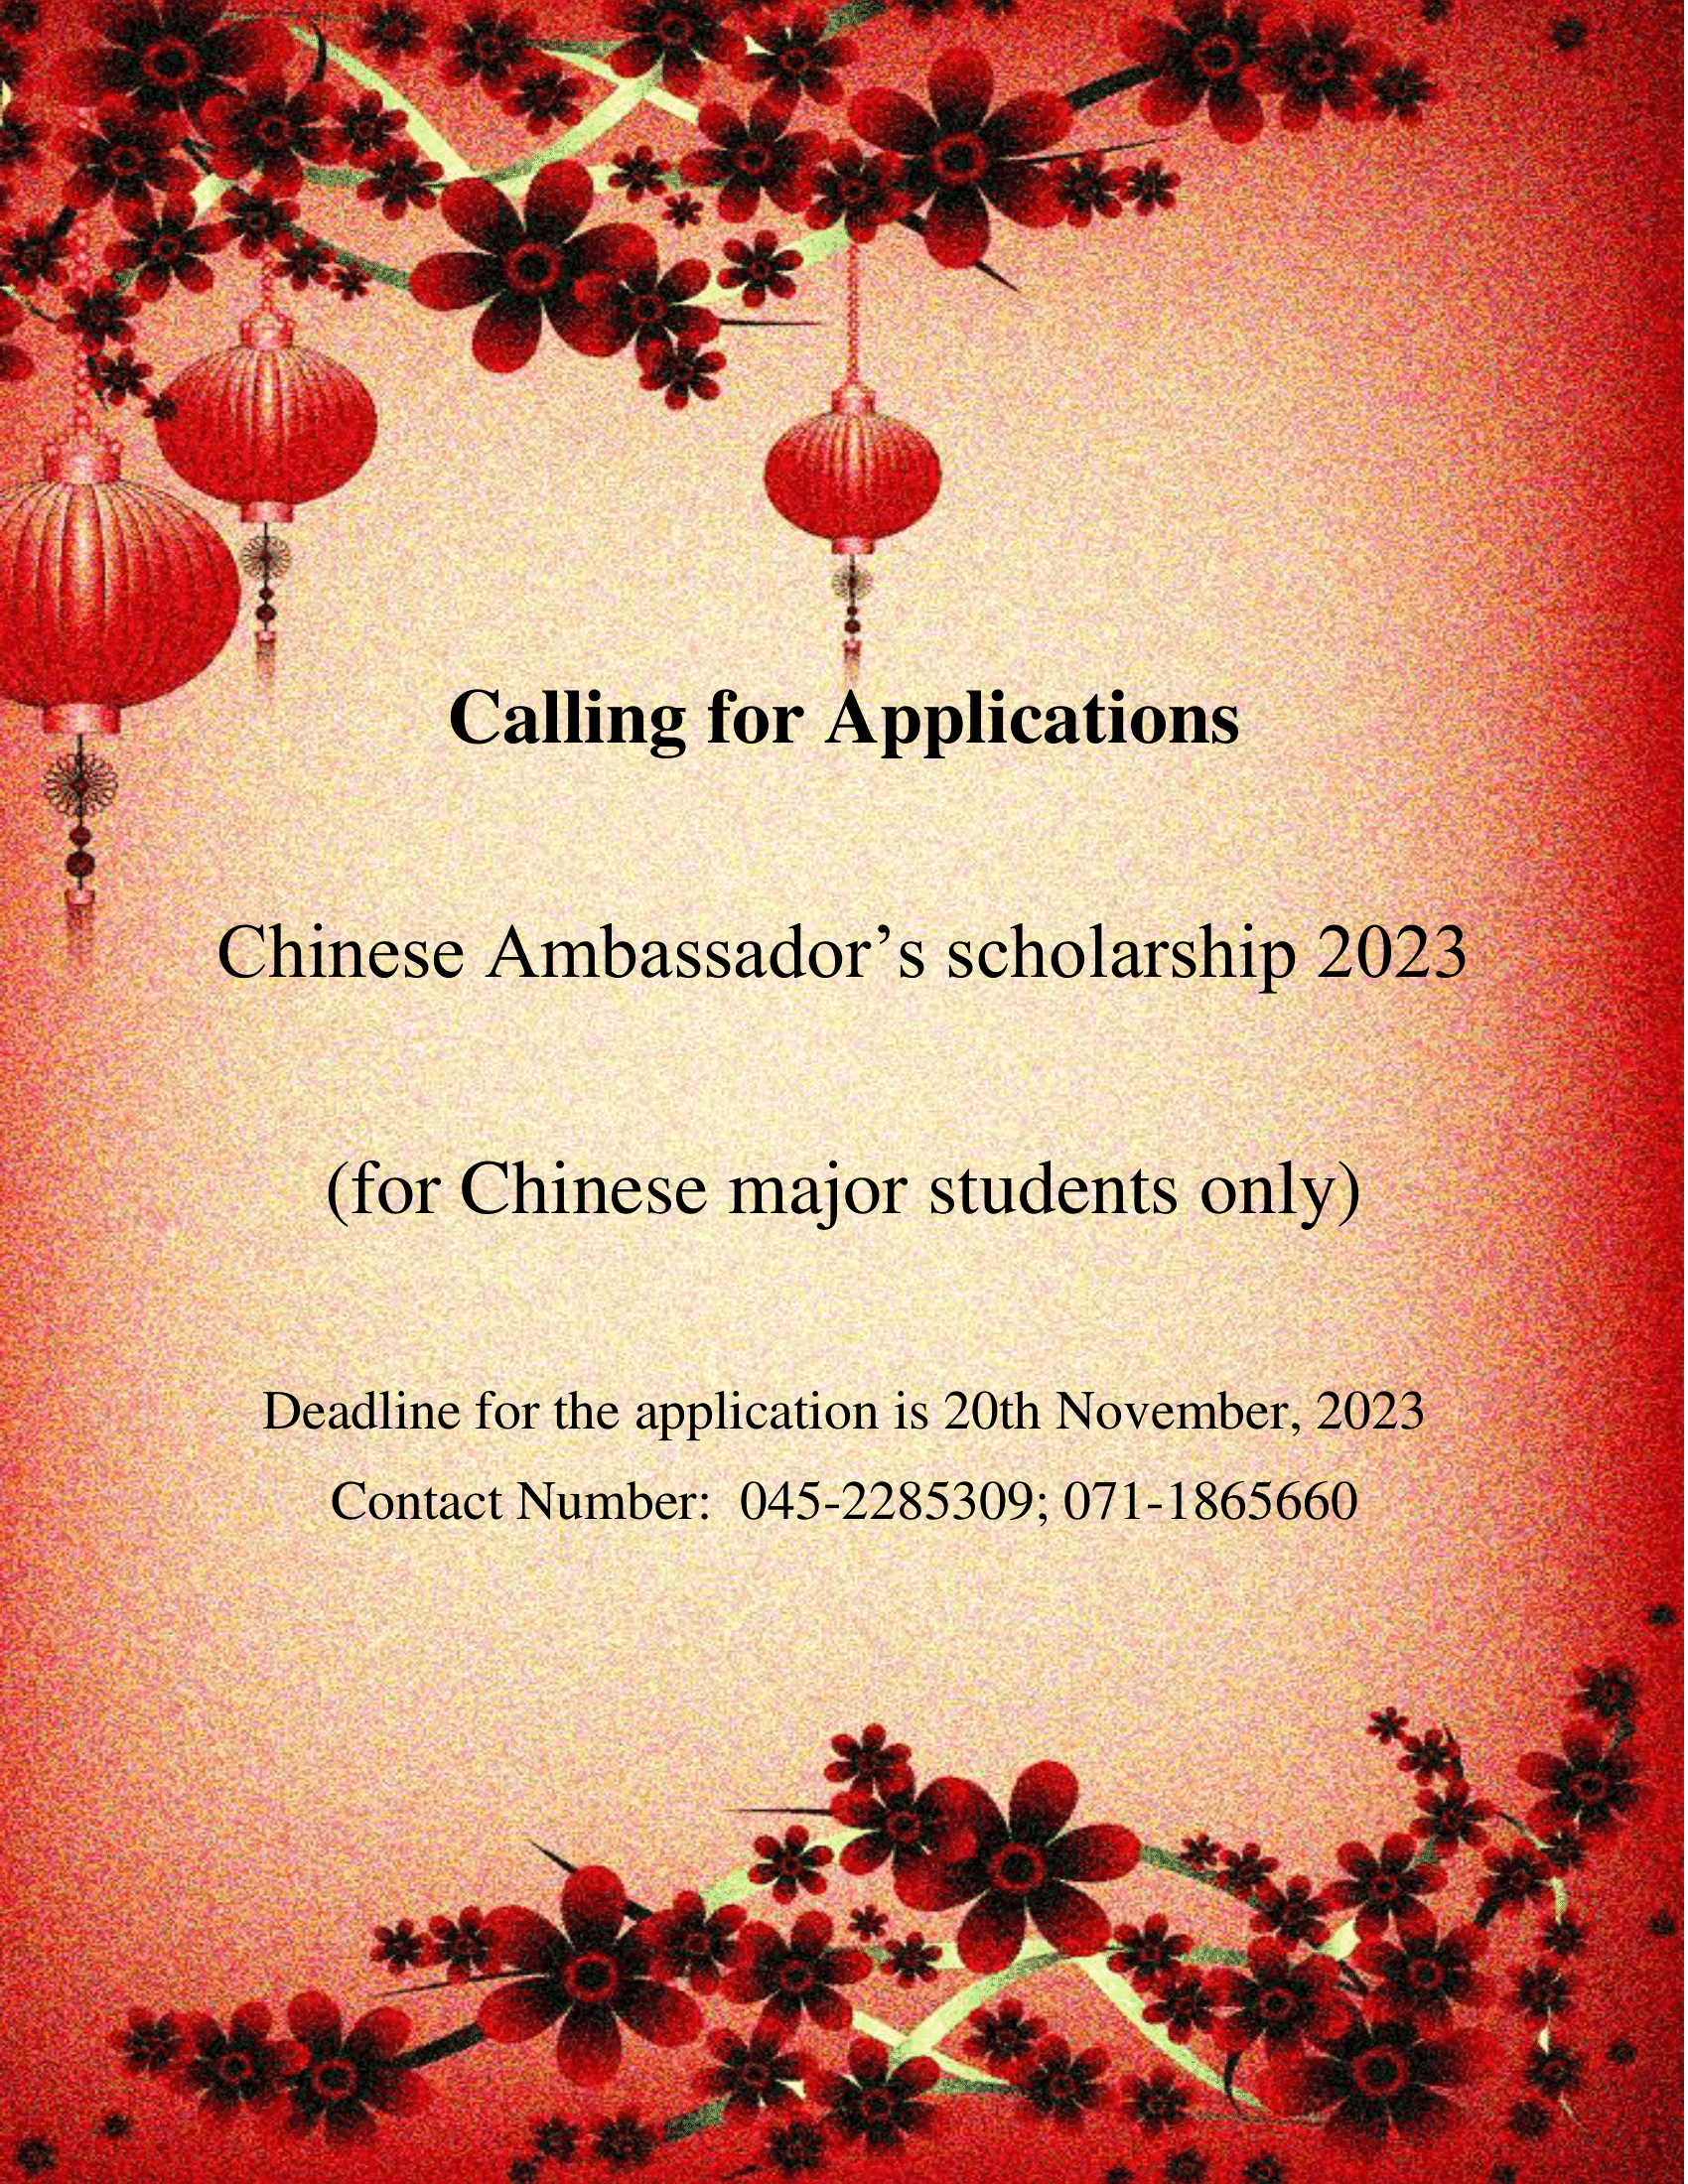 Calling for Applications - Chinese Ambassador’s scholarship 2023 for Chinese major students